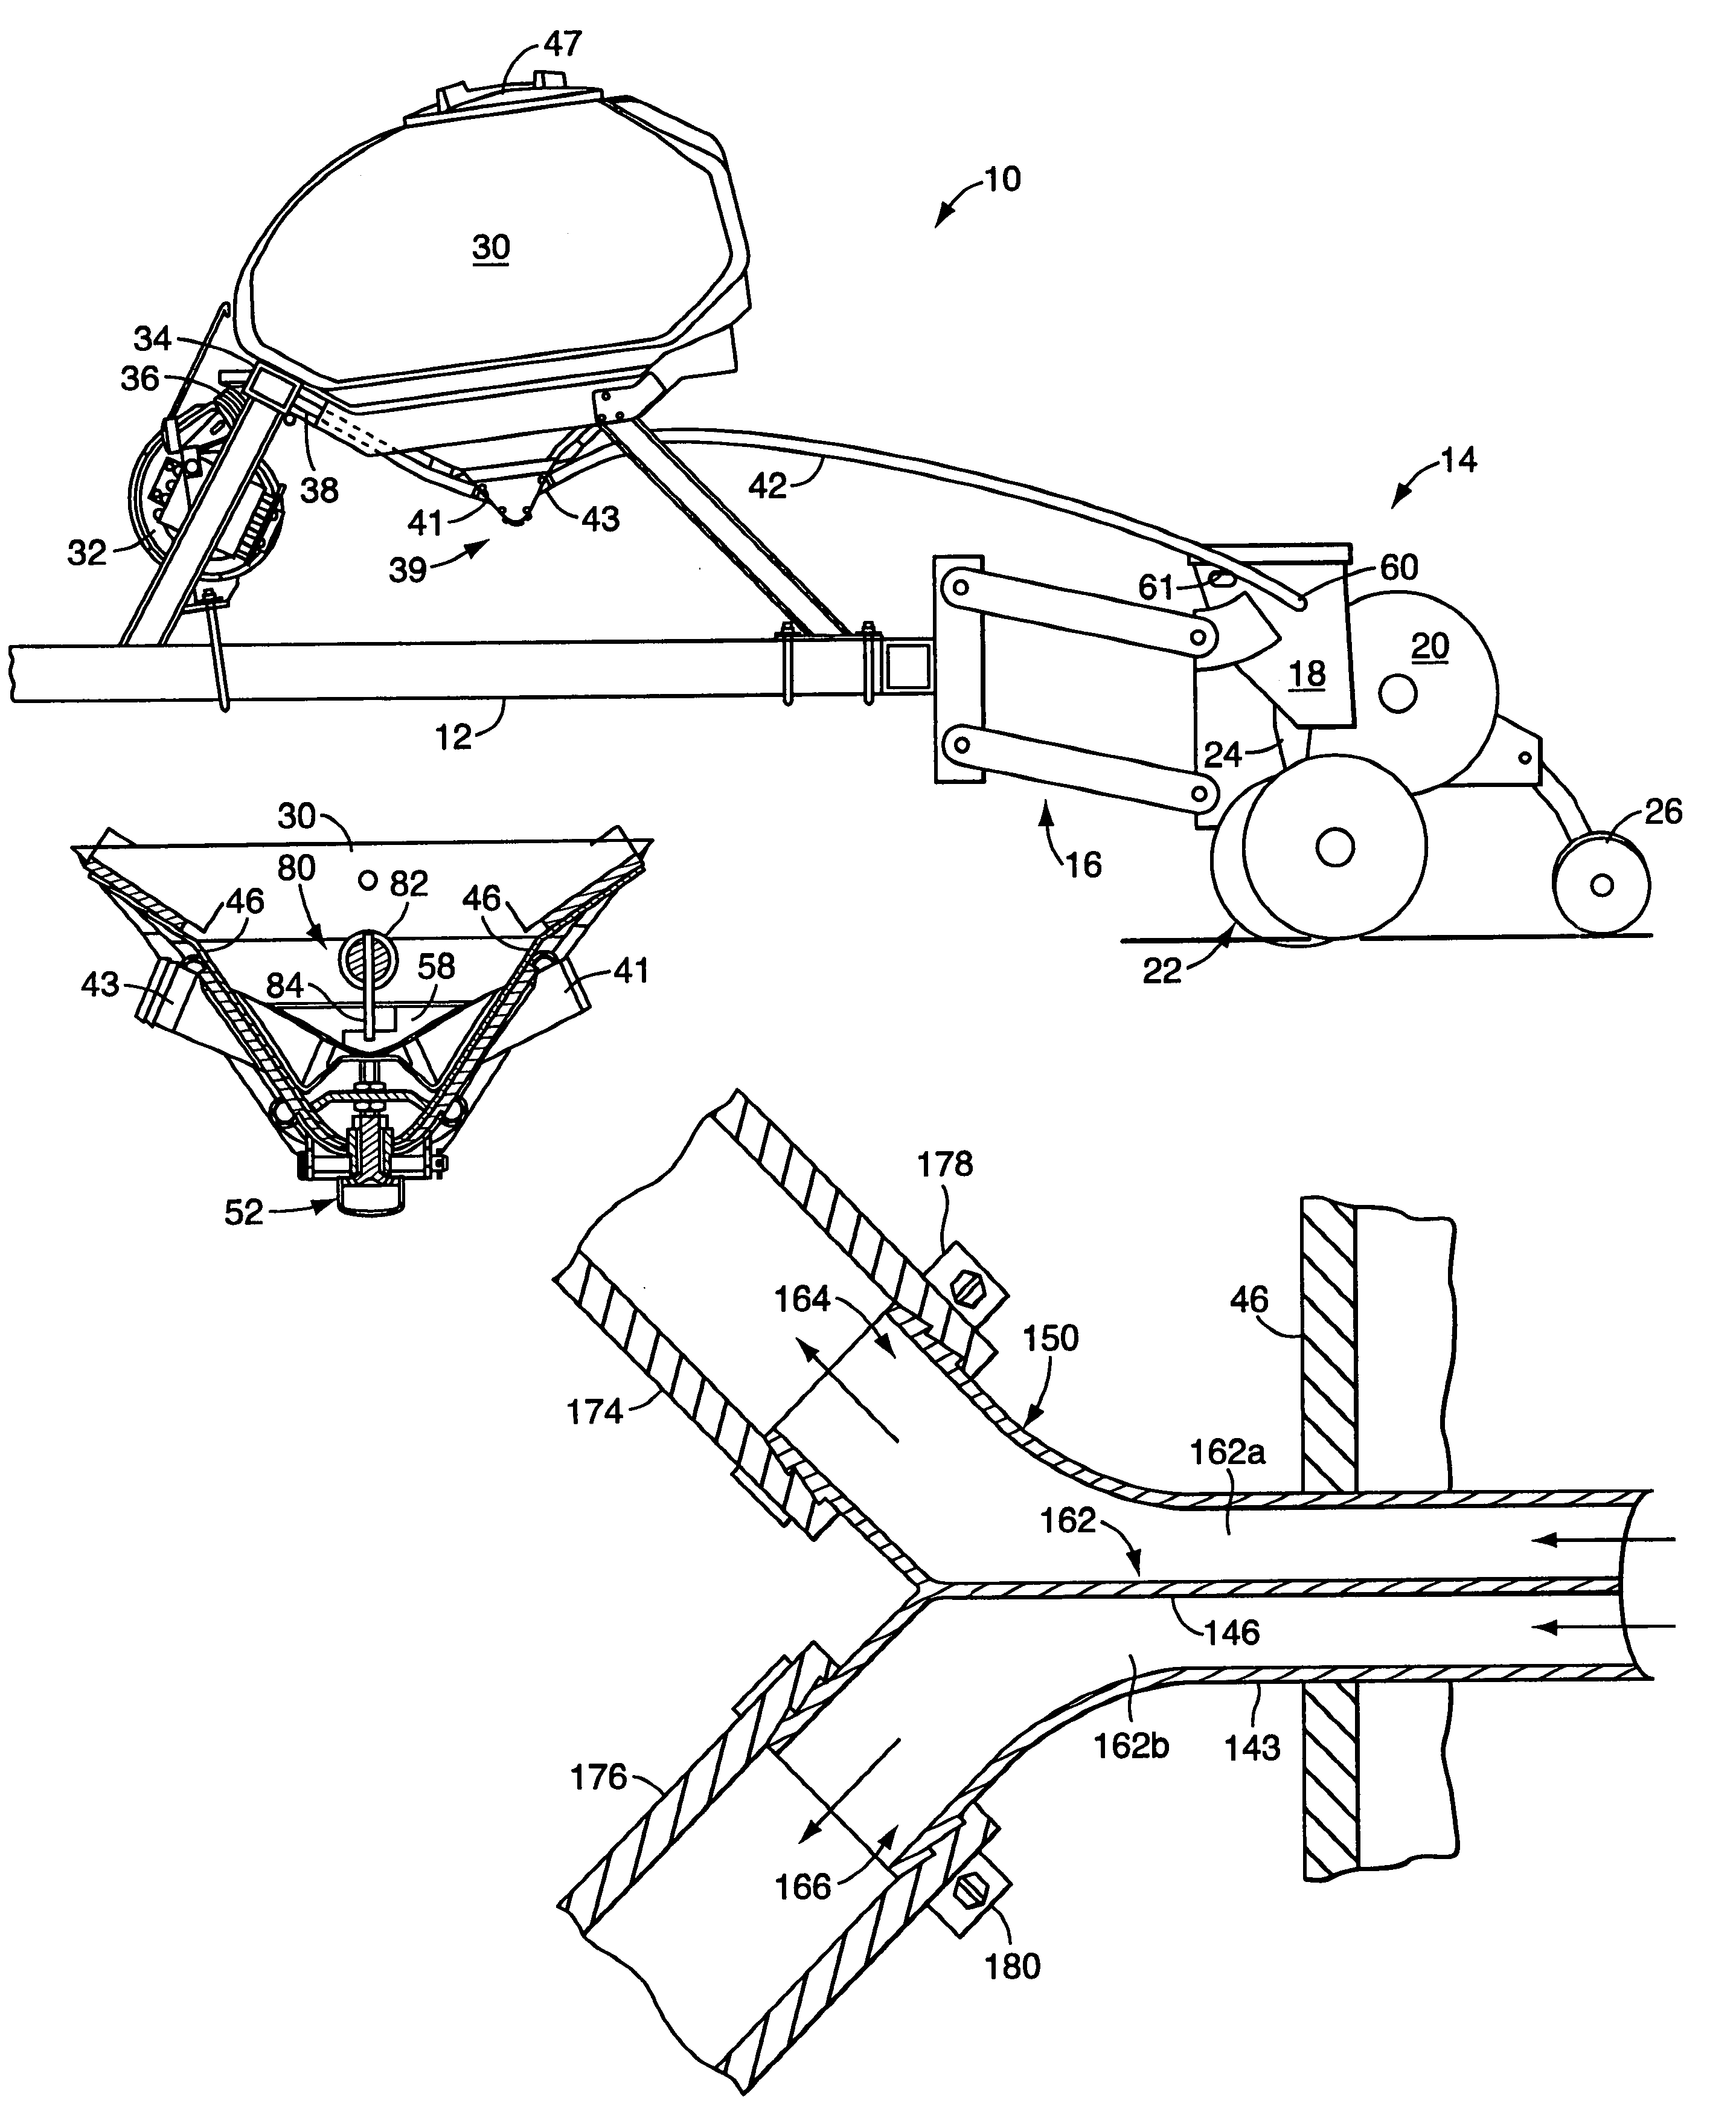 Nozzle assembly for product-on-demand delivery system